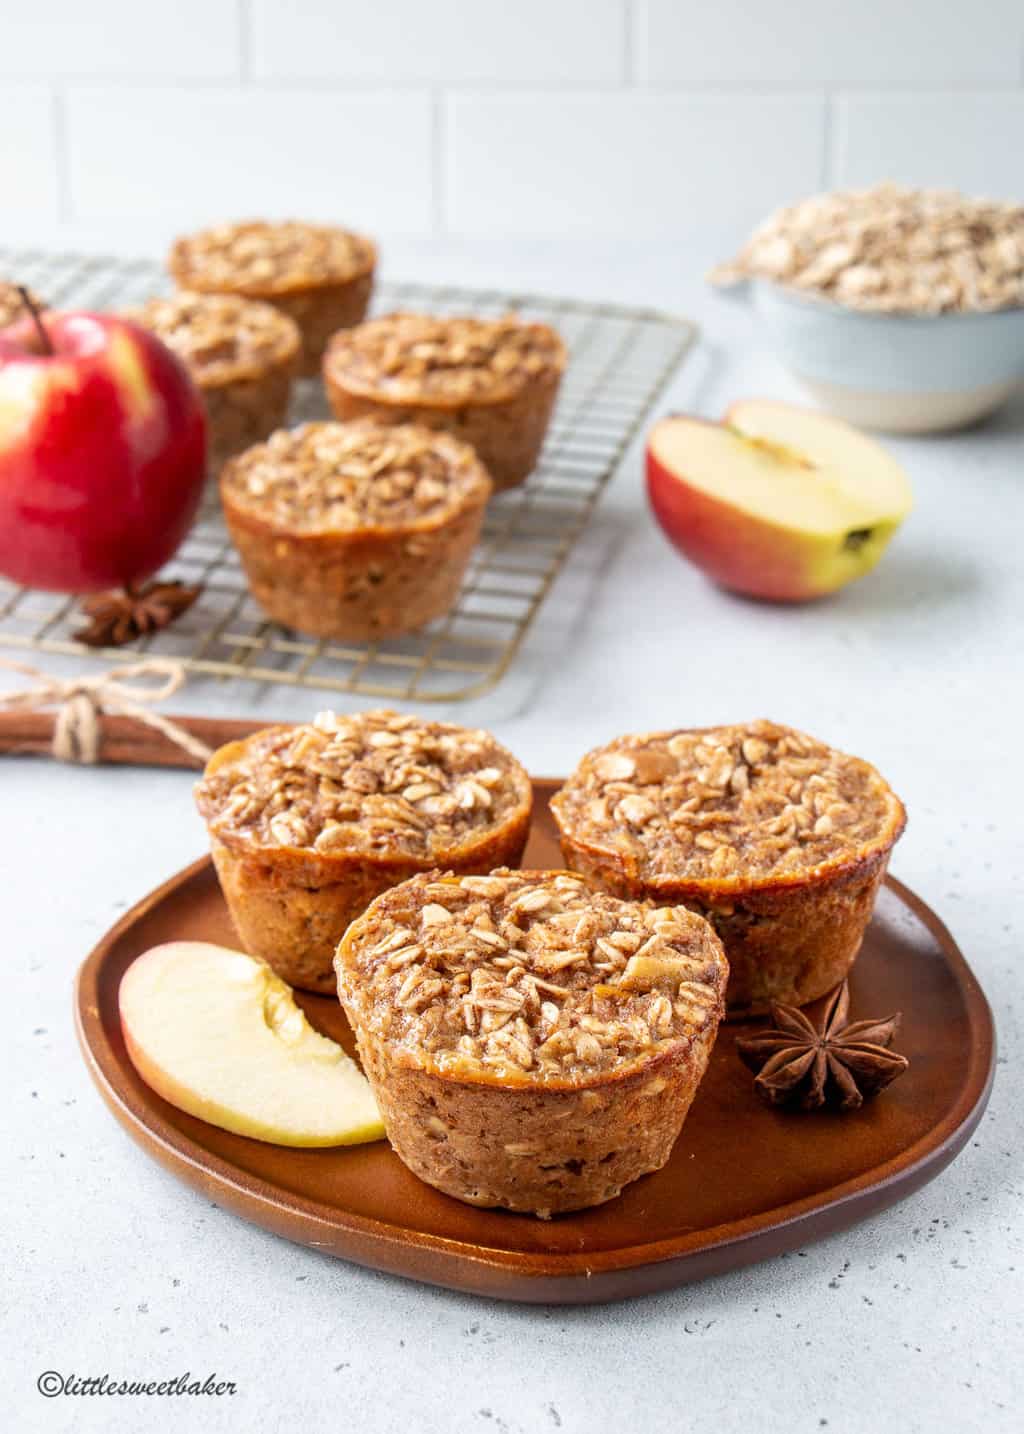 Three baked apple oatmeal cups on a wooden plate.